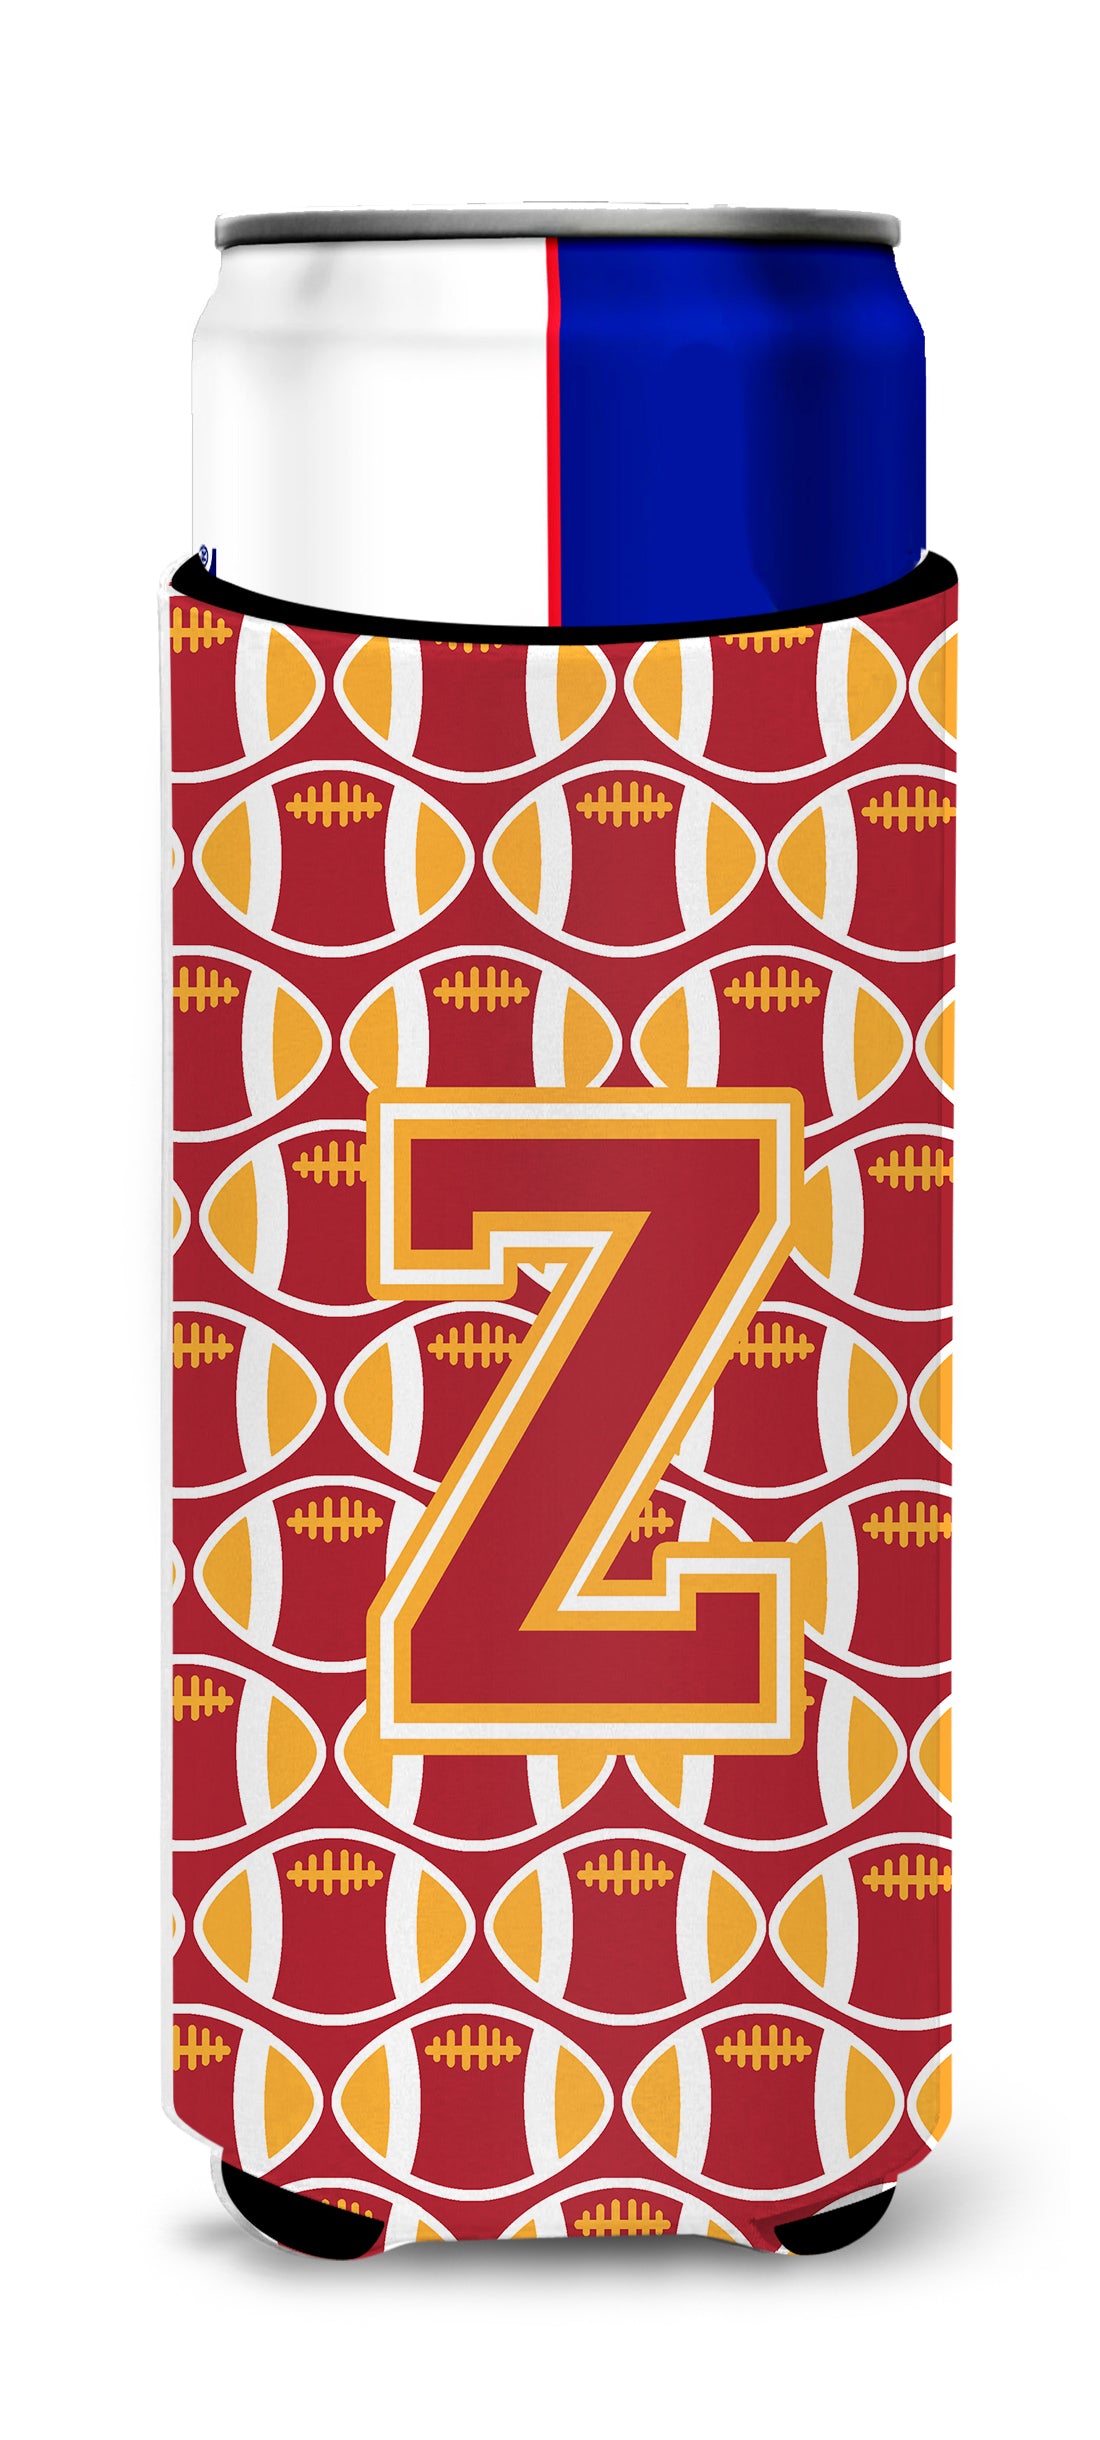 Letter Z Football Cardinal and Gold Ultra Beverage Insulators for slim cans CJ1070-ZMUK.